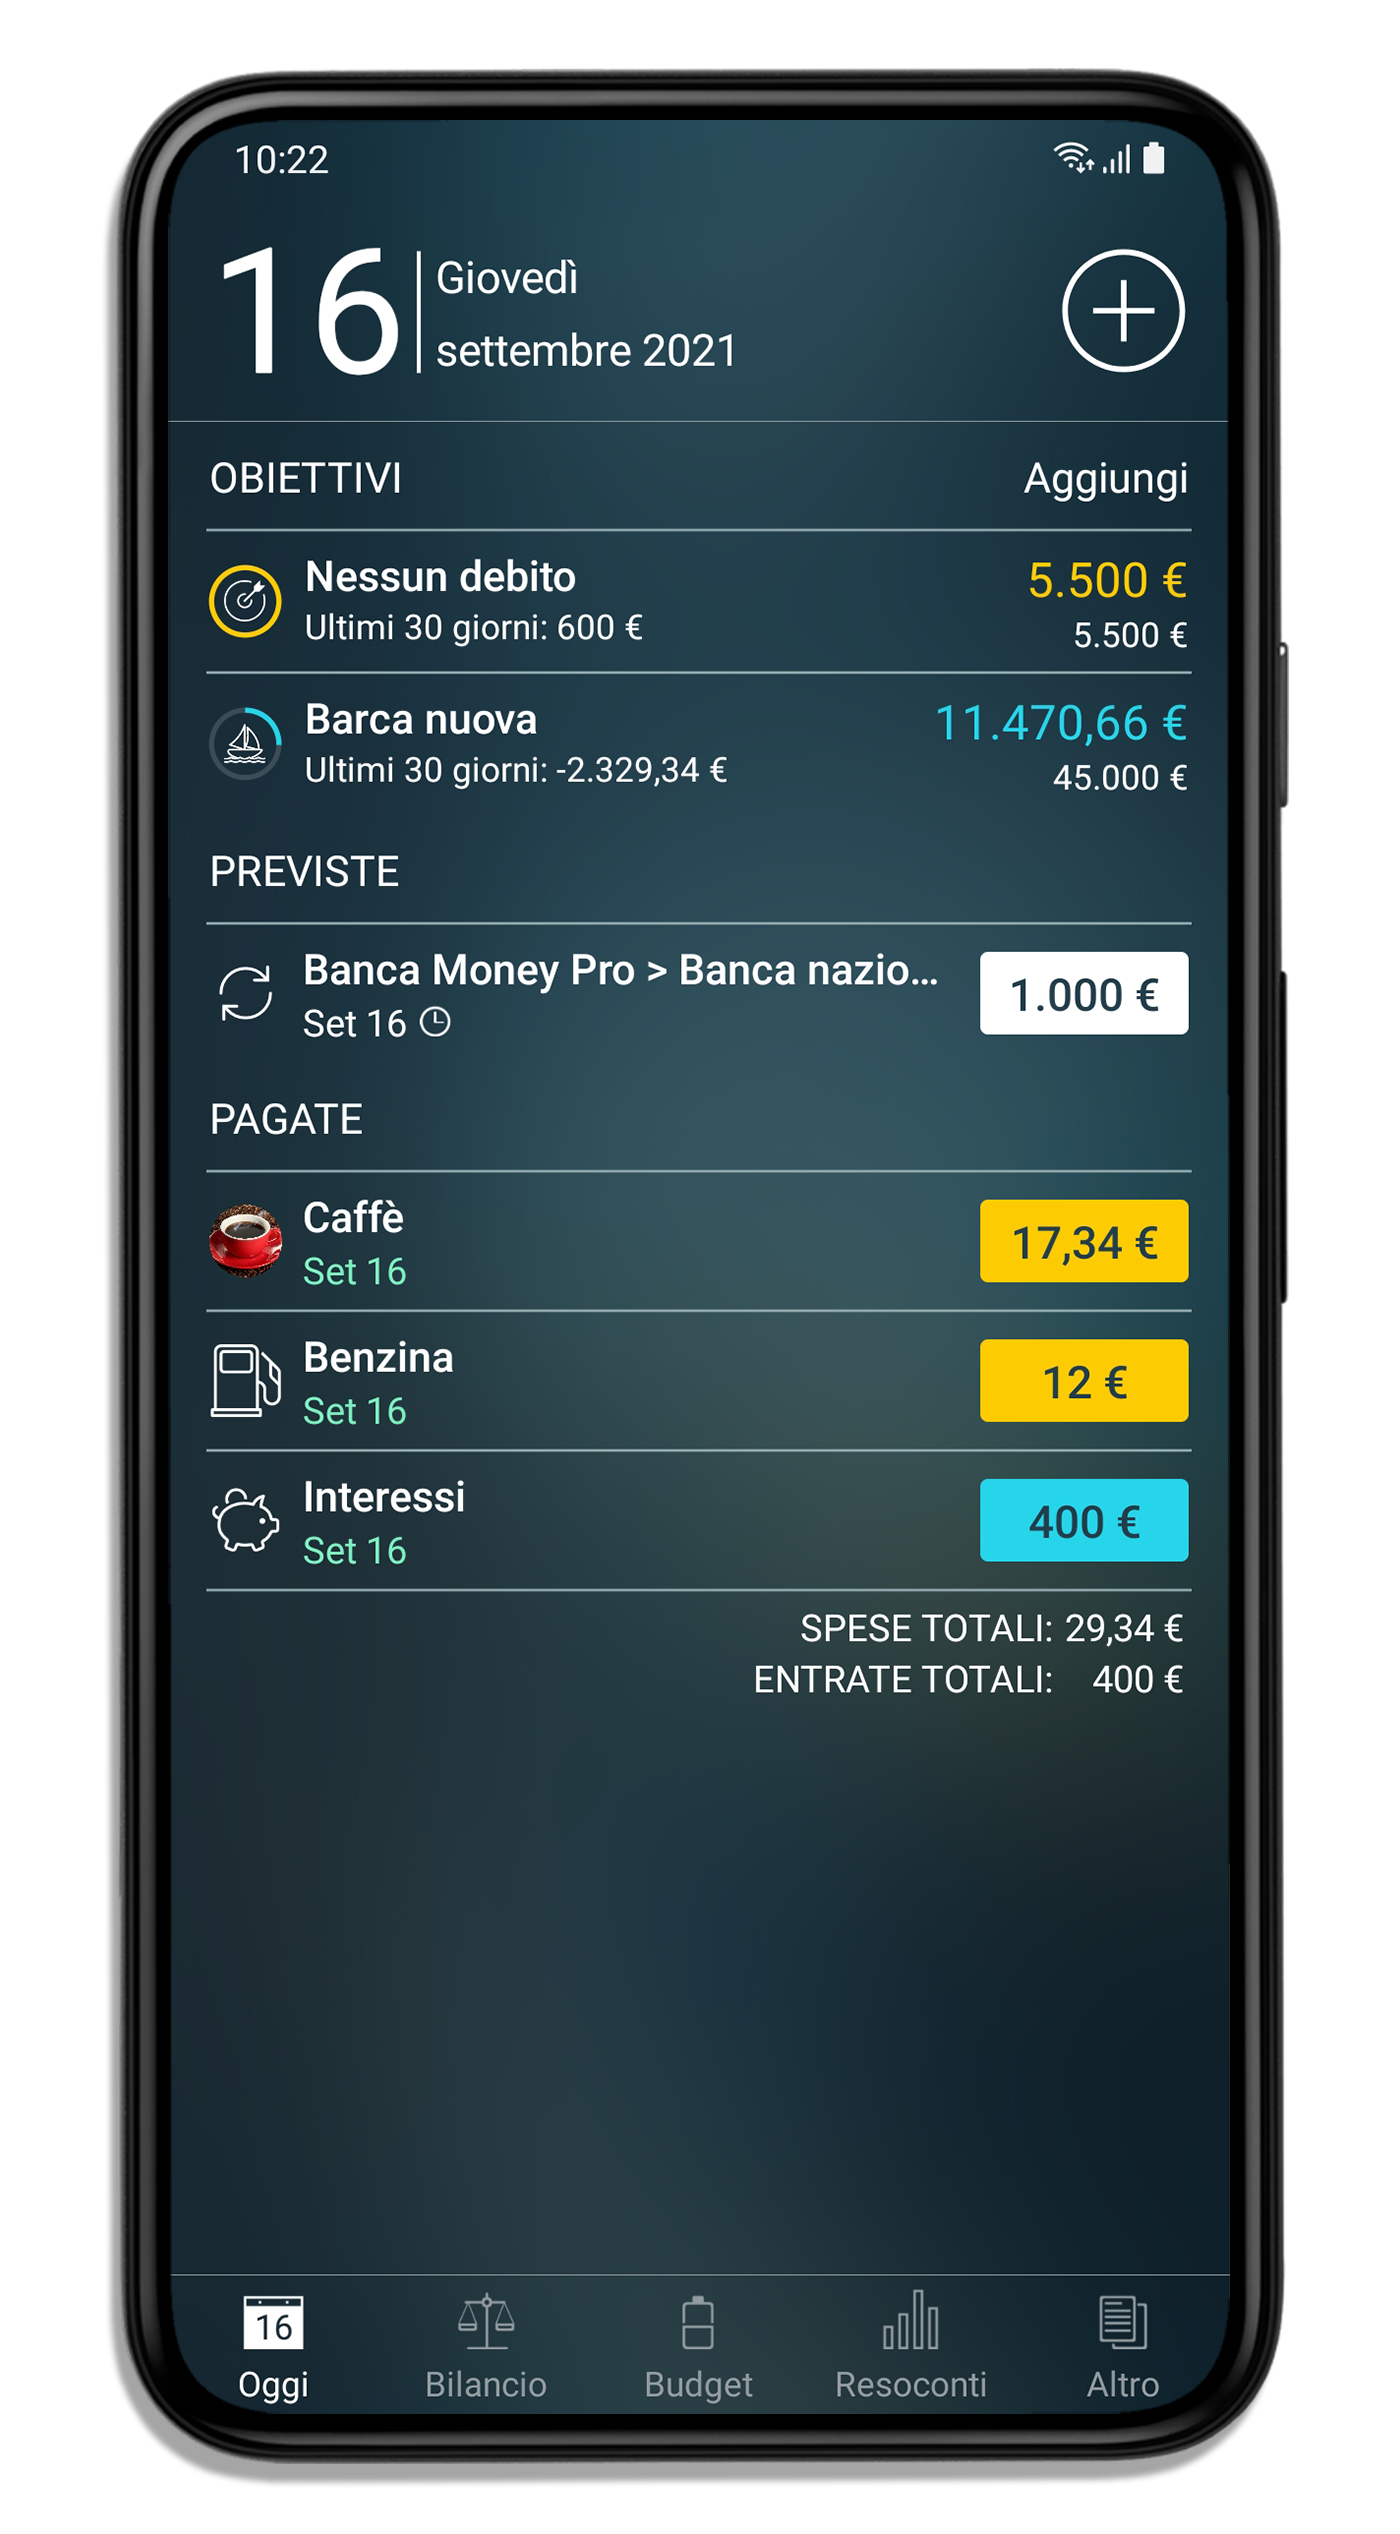 Money Pro instal the new version for ios